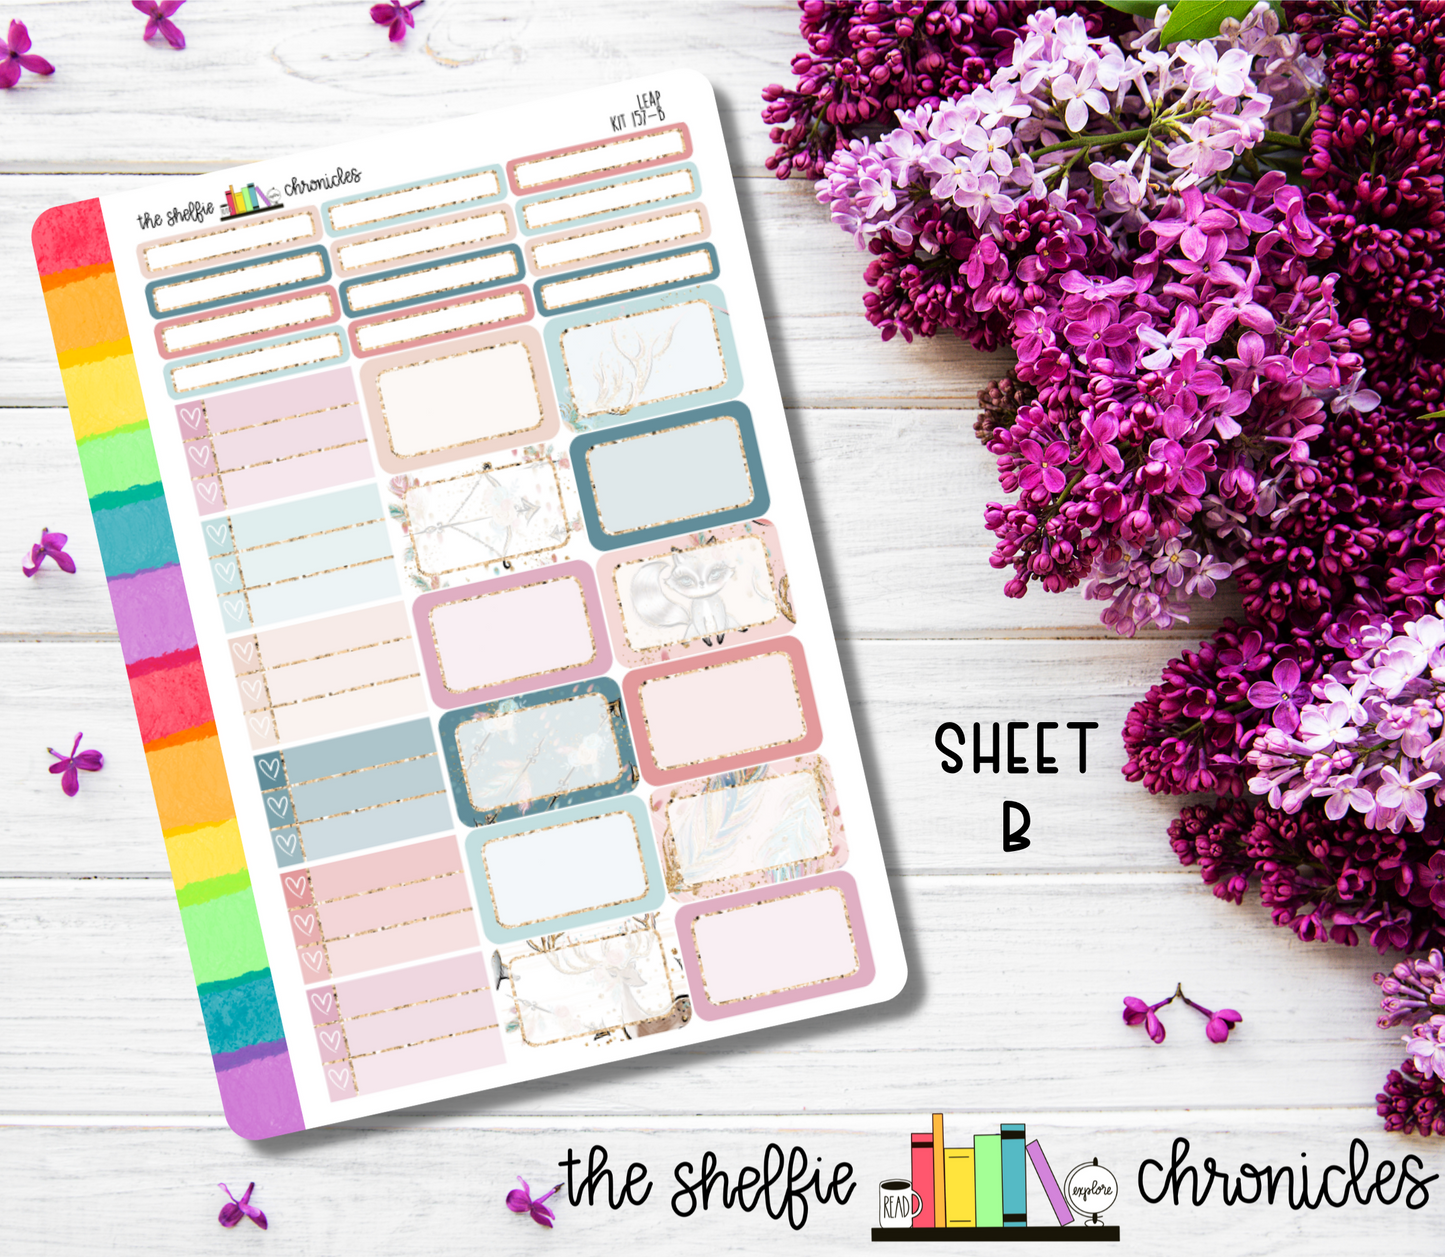 Kit 157 - Leap Weekly Kit - Die Cut Stickers - Repositionable Paper - Made To Fit 7x9 Planners